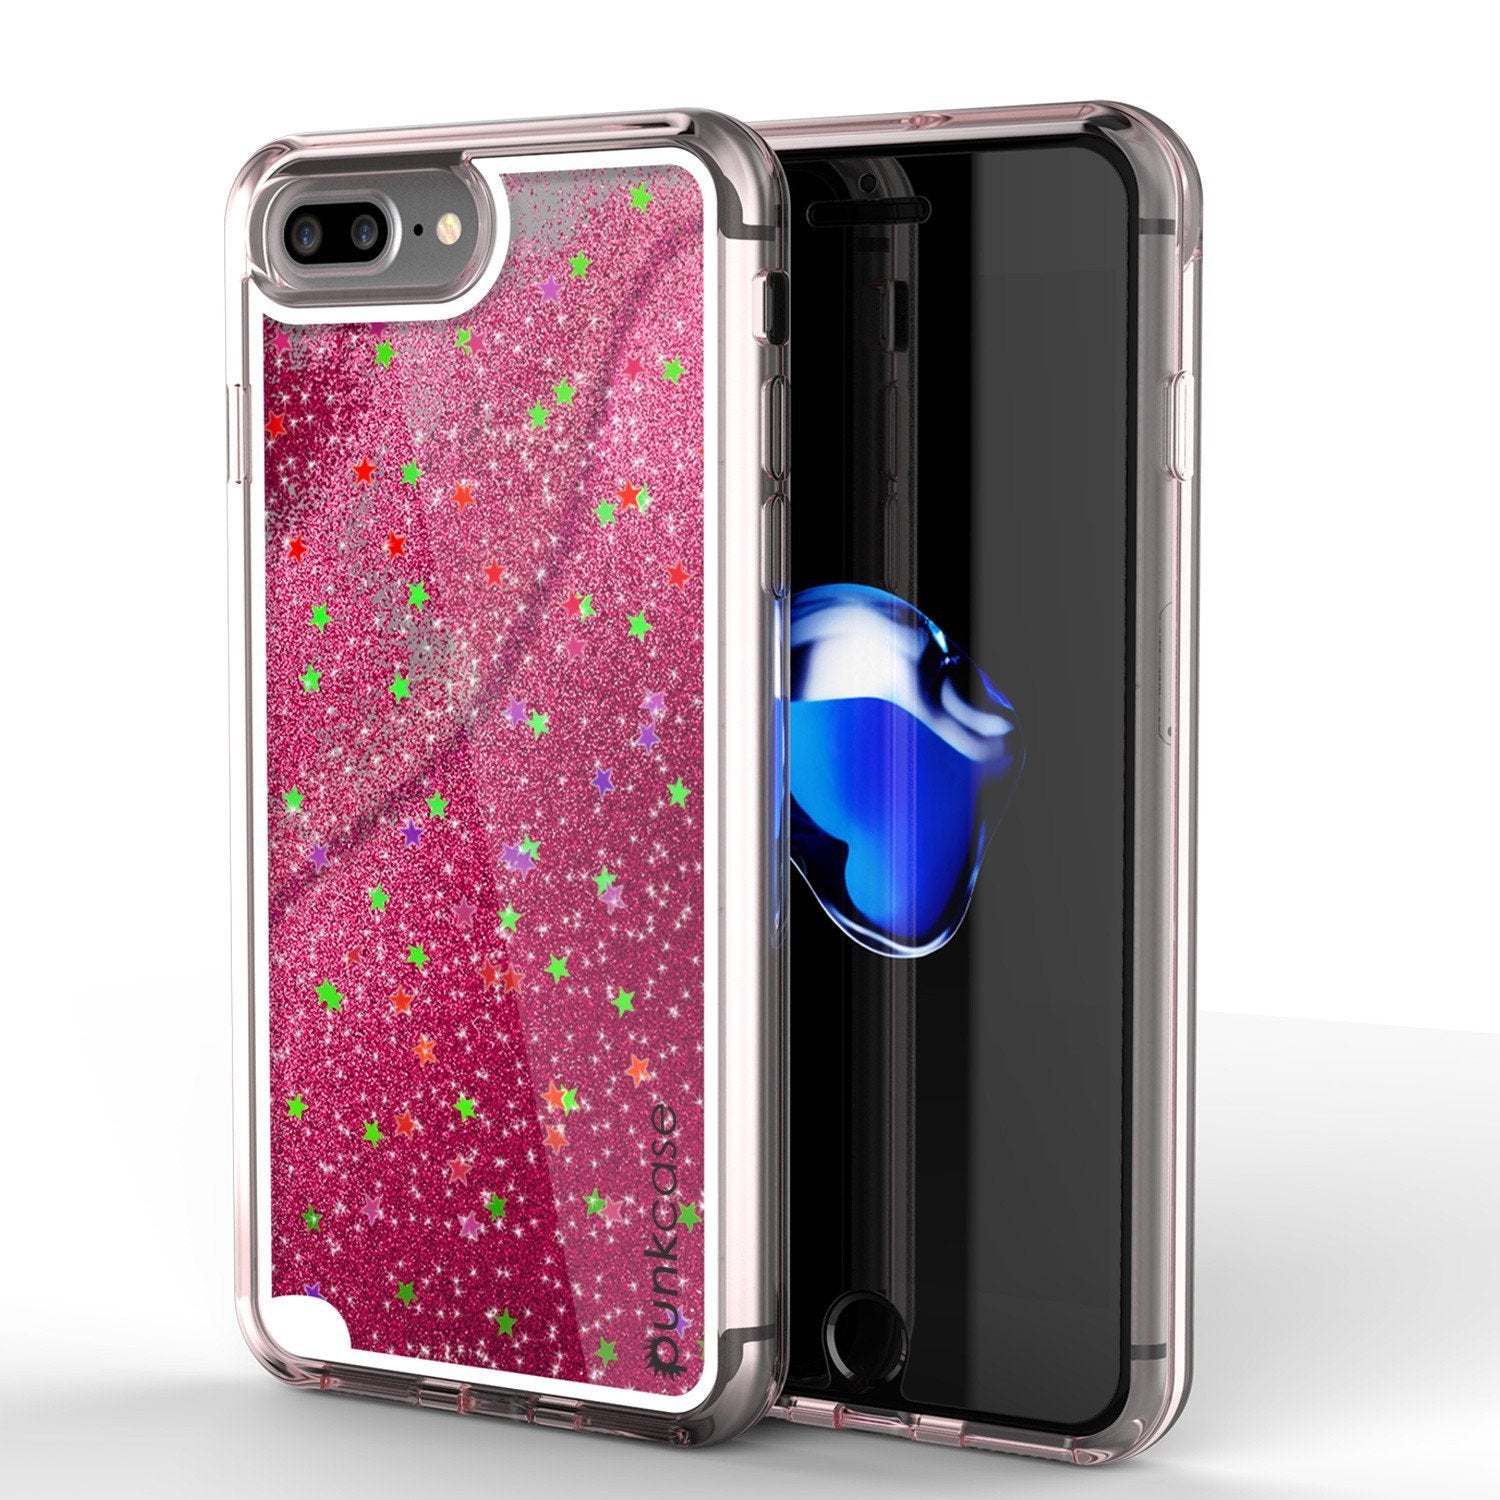 iPhone 8+ Plus Case, Punkcase Liquid Pink, Floating Glitter Cover Series